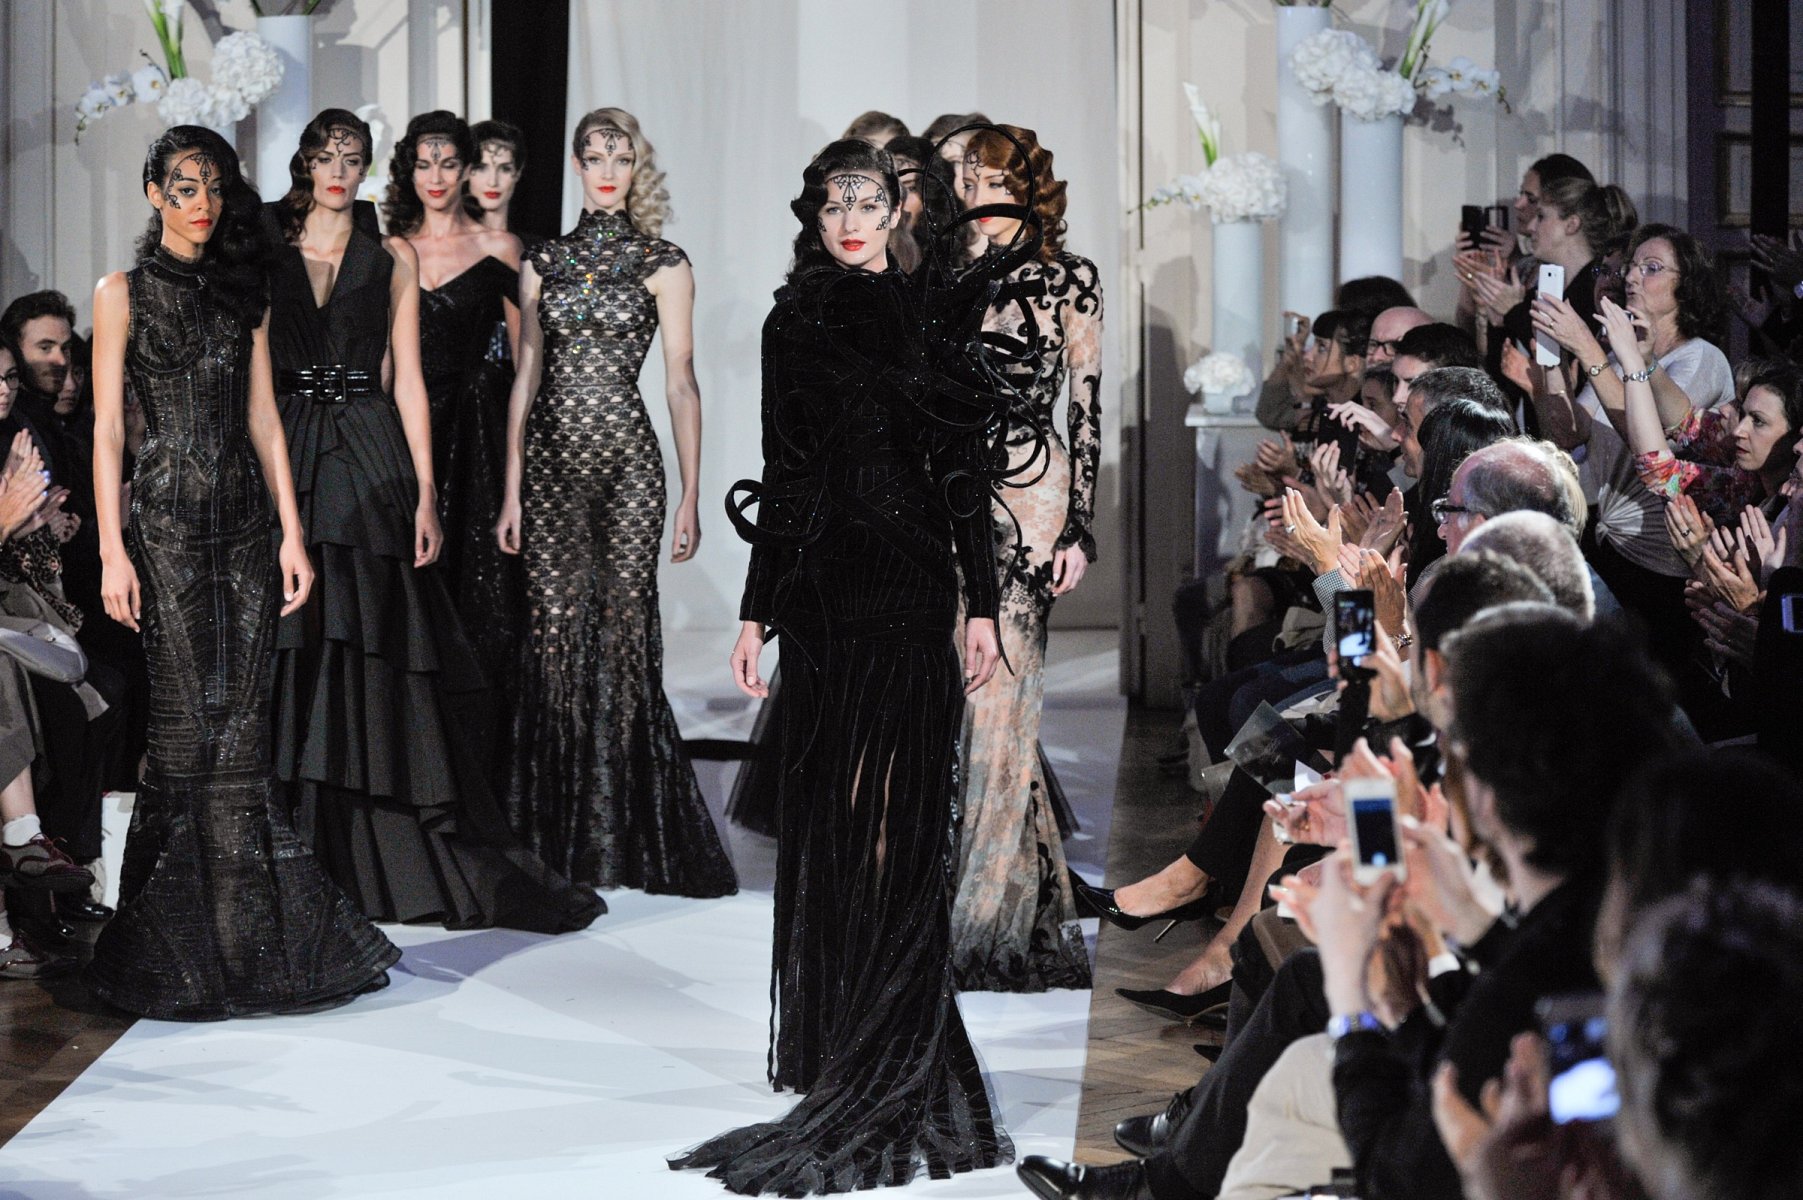 Eymeric François Herbst/Winter 2014-2015 - Couture - 1